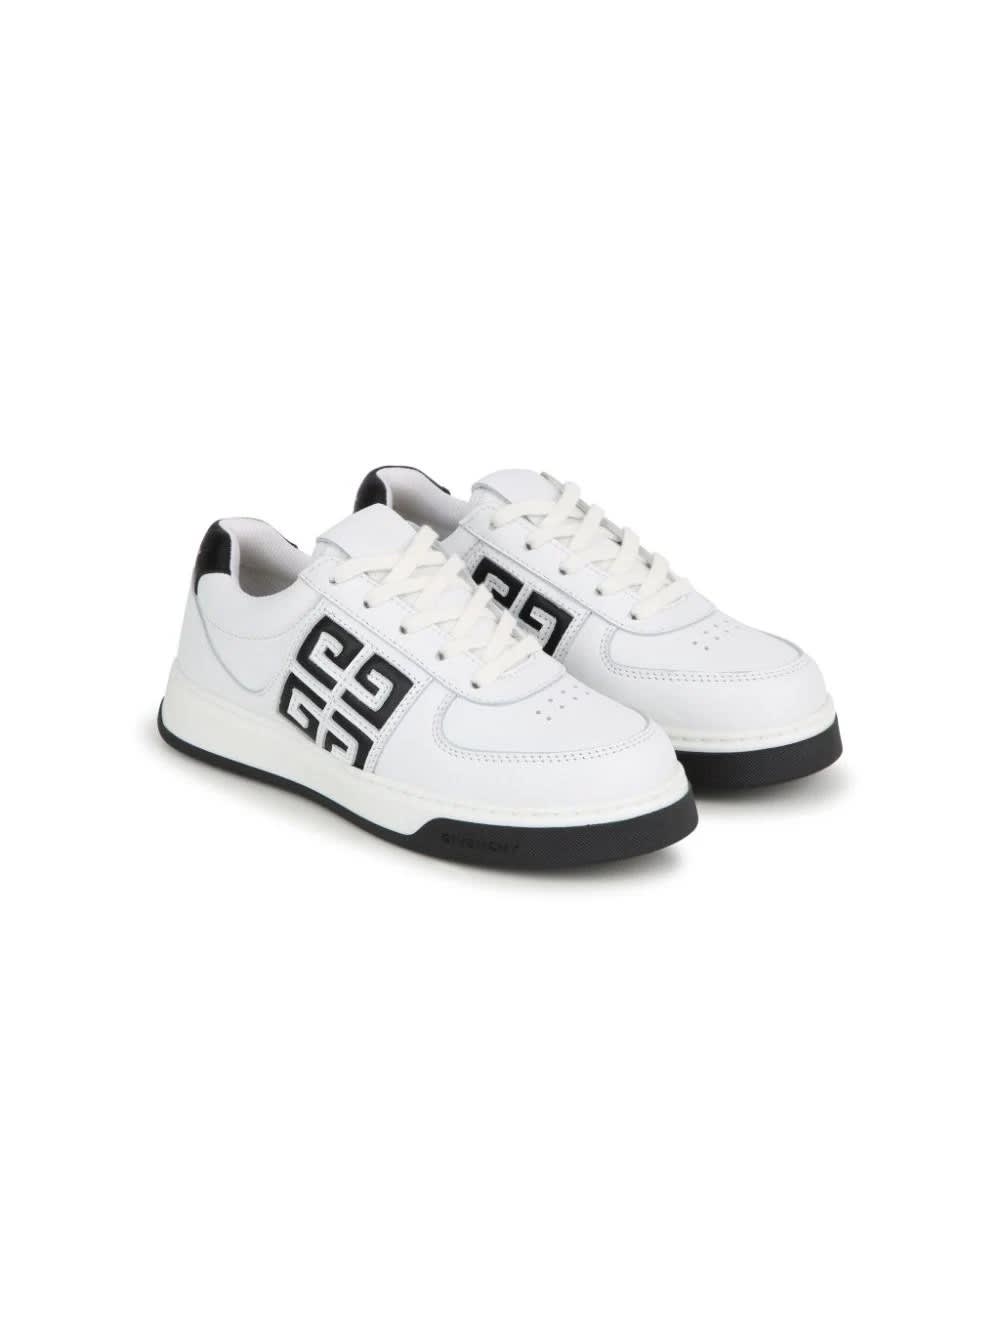 Shop Givenchy G4 Sneakers In White And Black Leather